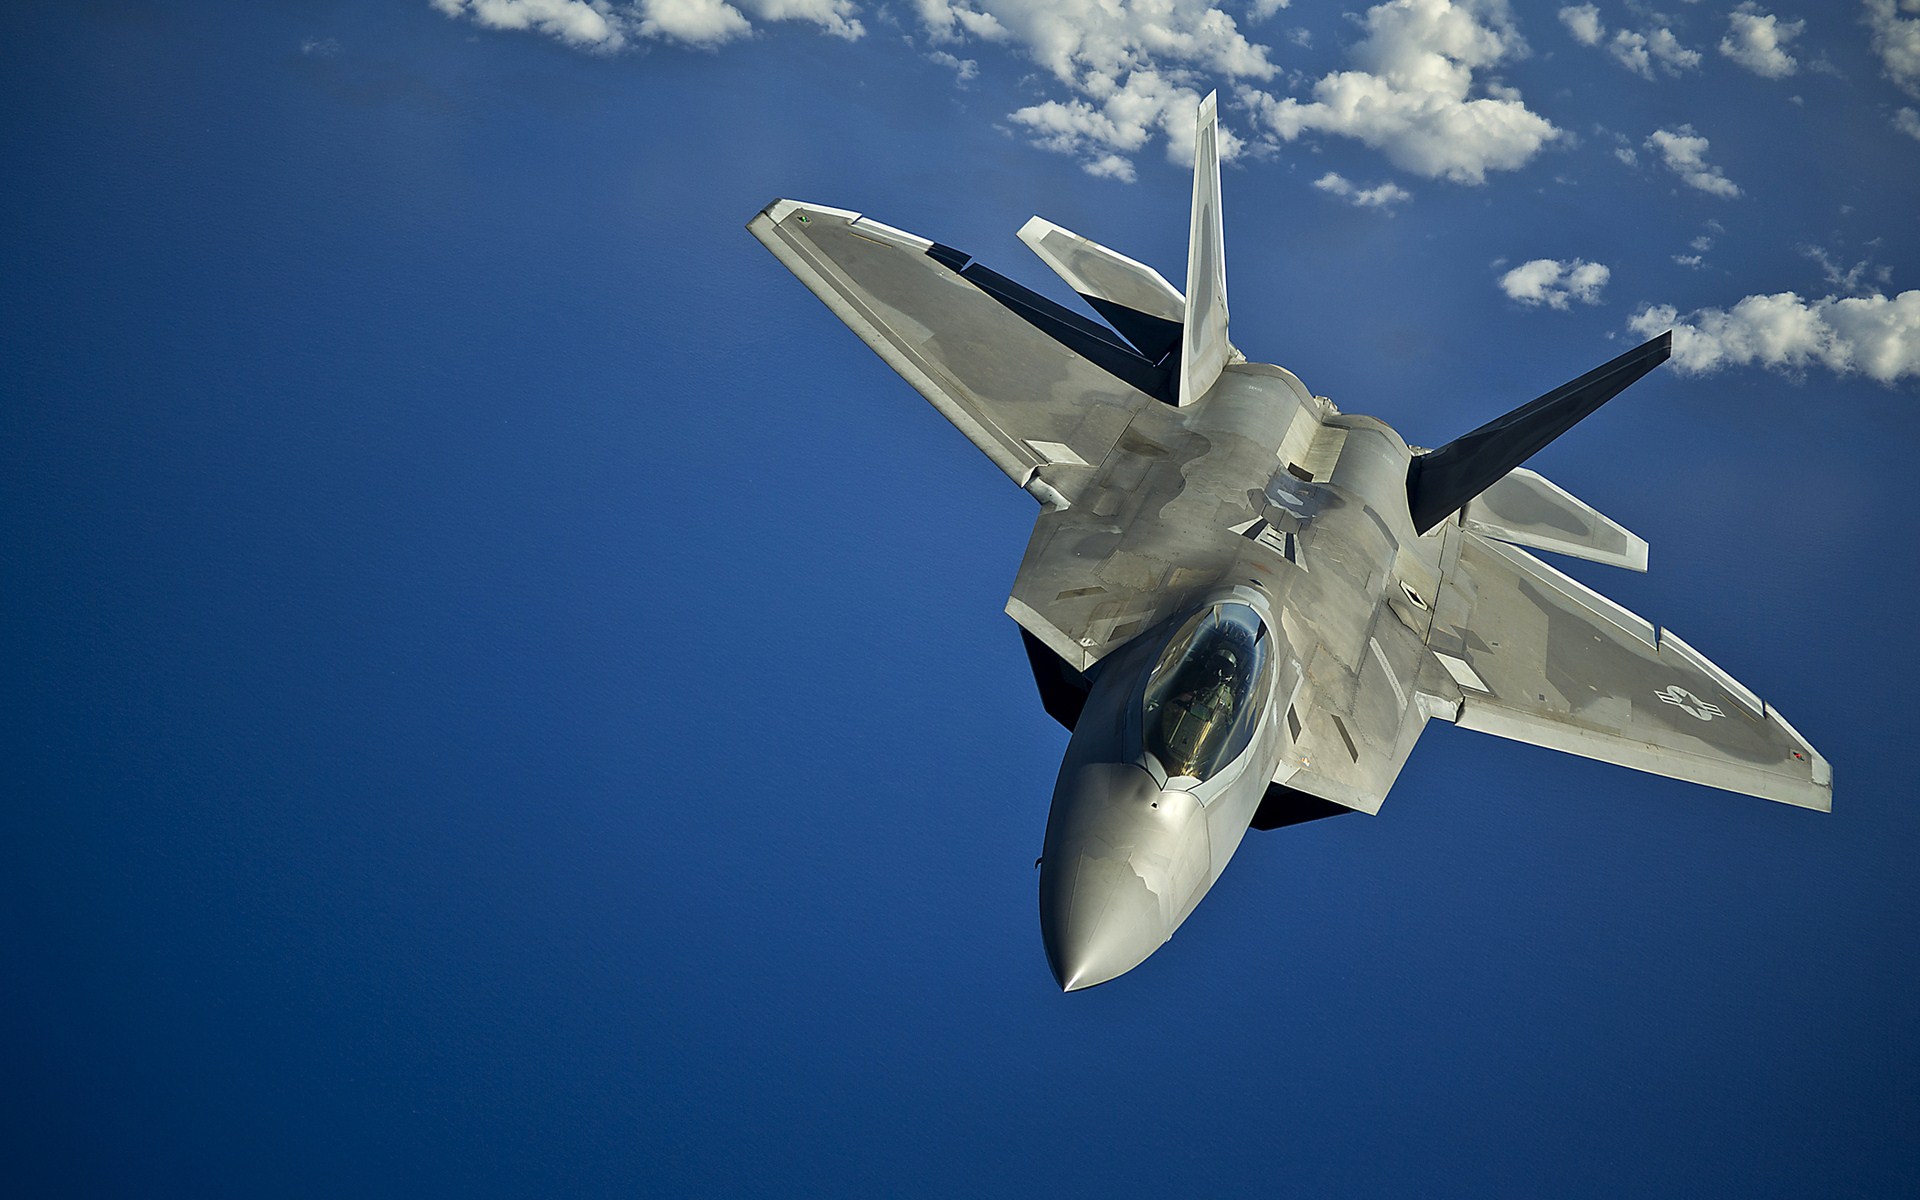 F 22 Raptor in Ace Combat Wallpapers | HD Wallpapers | ID #8837